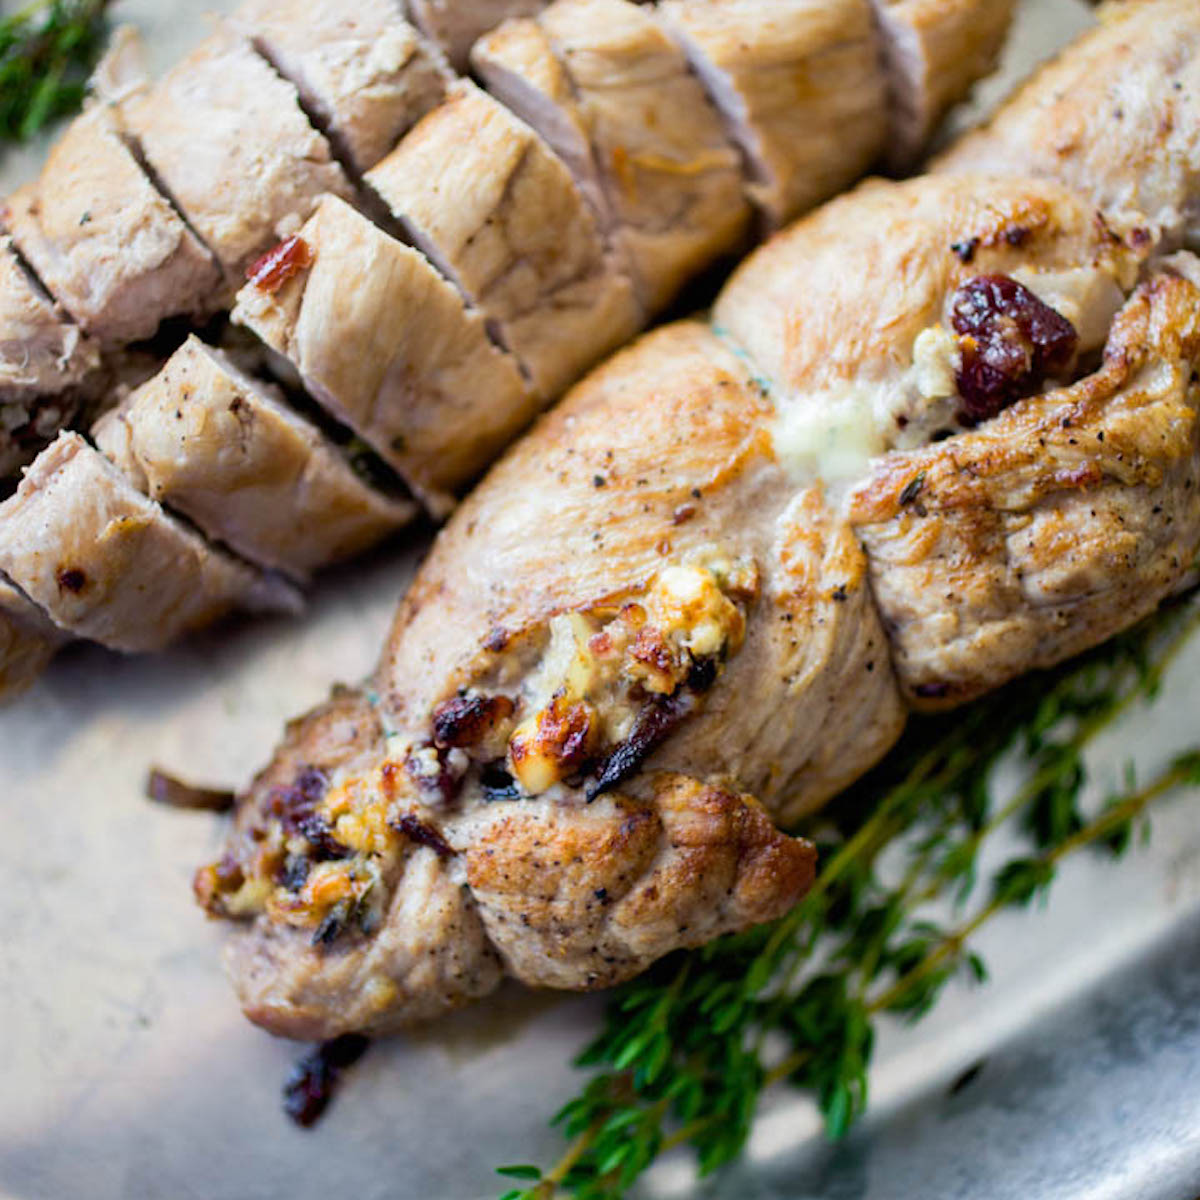 A stuffed pork tenderloin has cranberries and blue cheese peeking out of the roll. A bunch of fresh thyme is on the platter.